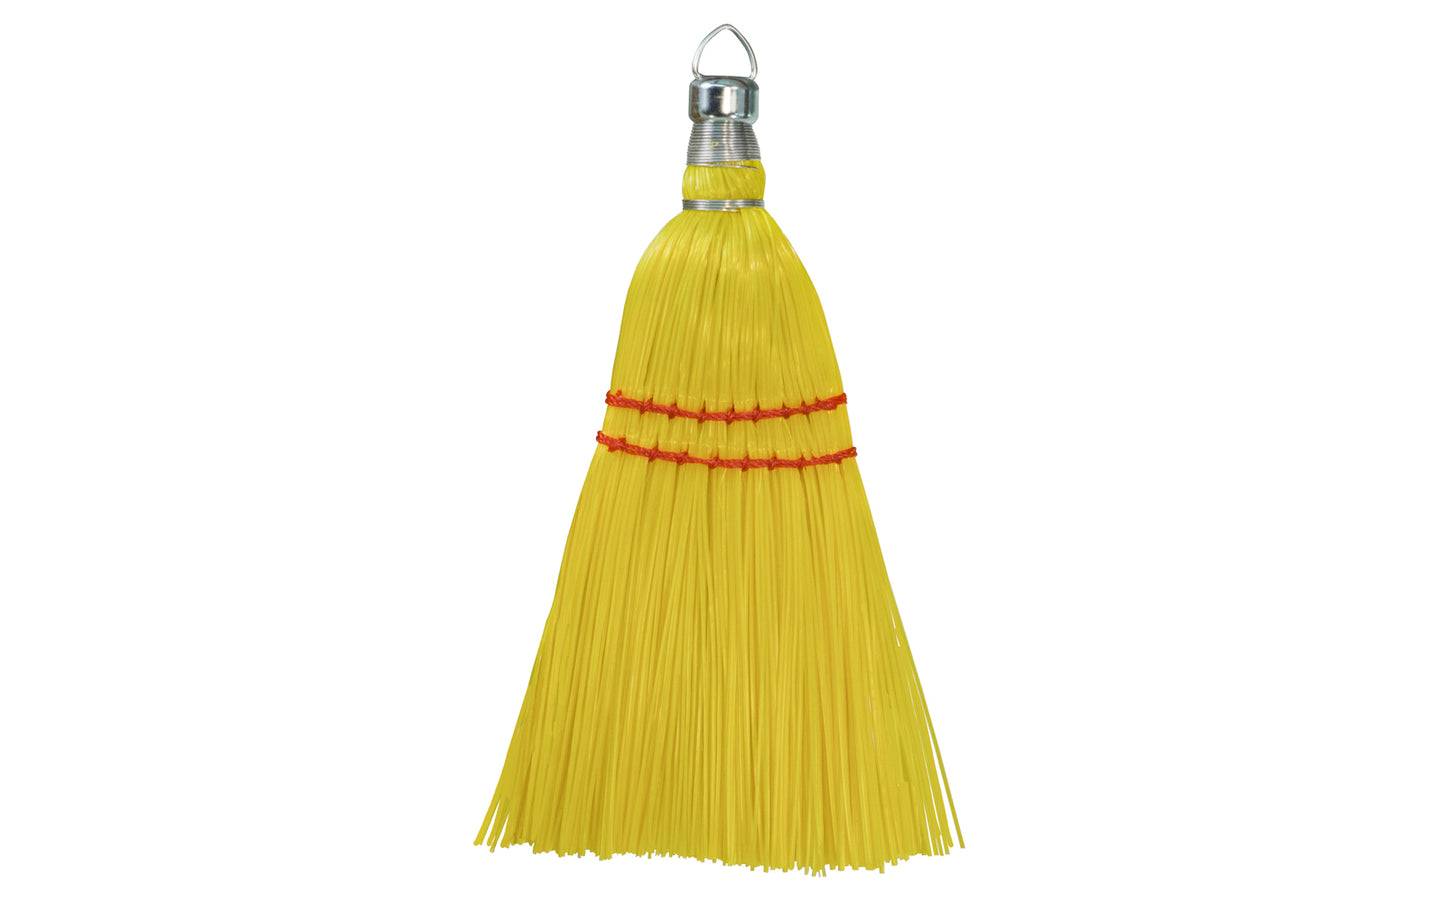 Yellow Plastic Whisk Broom - 12" Long - plastic bristles whisk broom / hand brush made by Magnolia. This whisk brush is sewed two times, cad. plated ring cap. Good for general purpose & the workshop area.